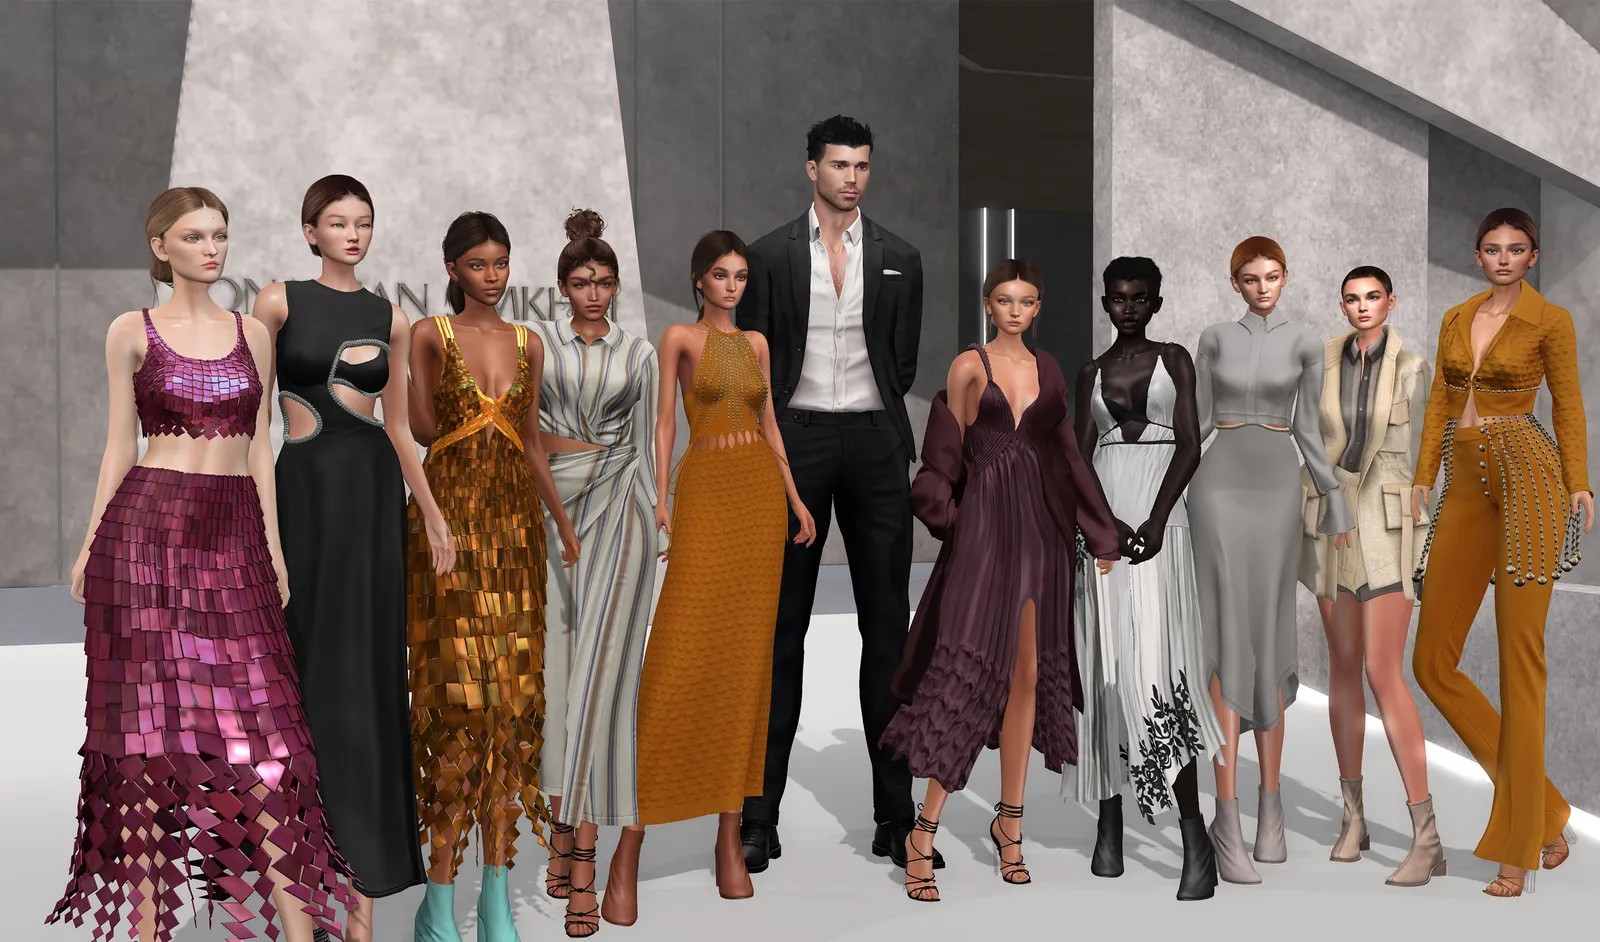 Blueberry worked on a collection with luxury brand Jonathan Simkhai for Metaverse Fashion Week (Foto: Reprodução/ Blueberry)